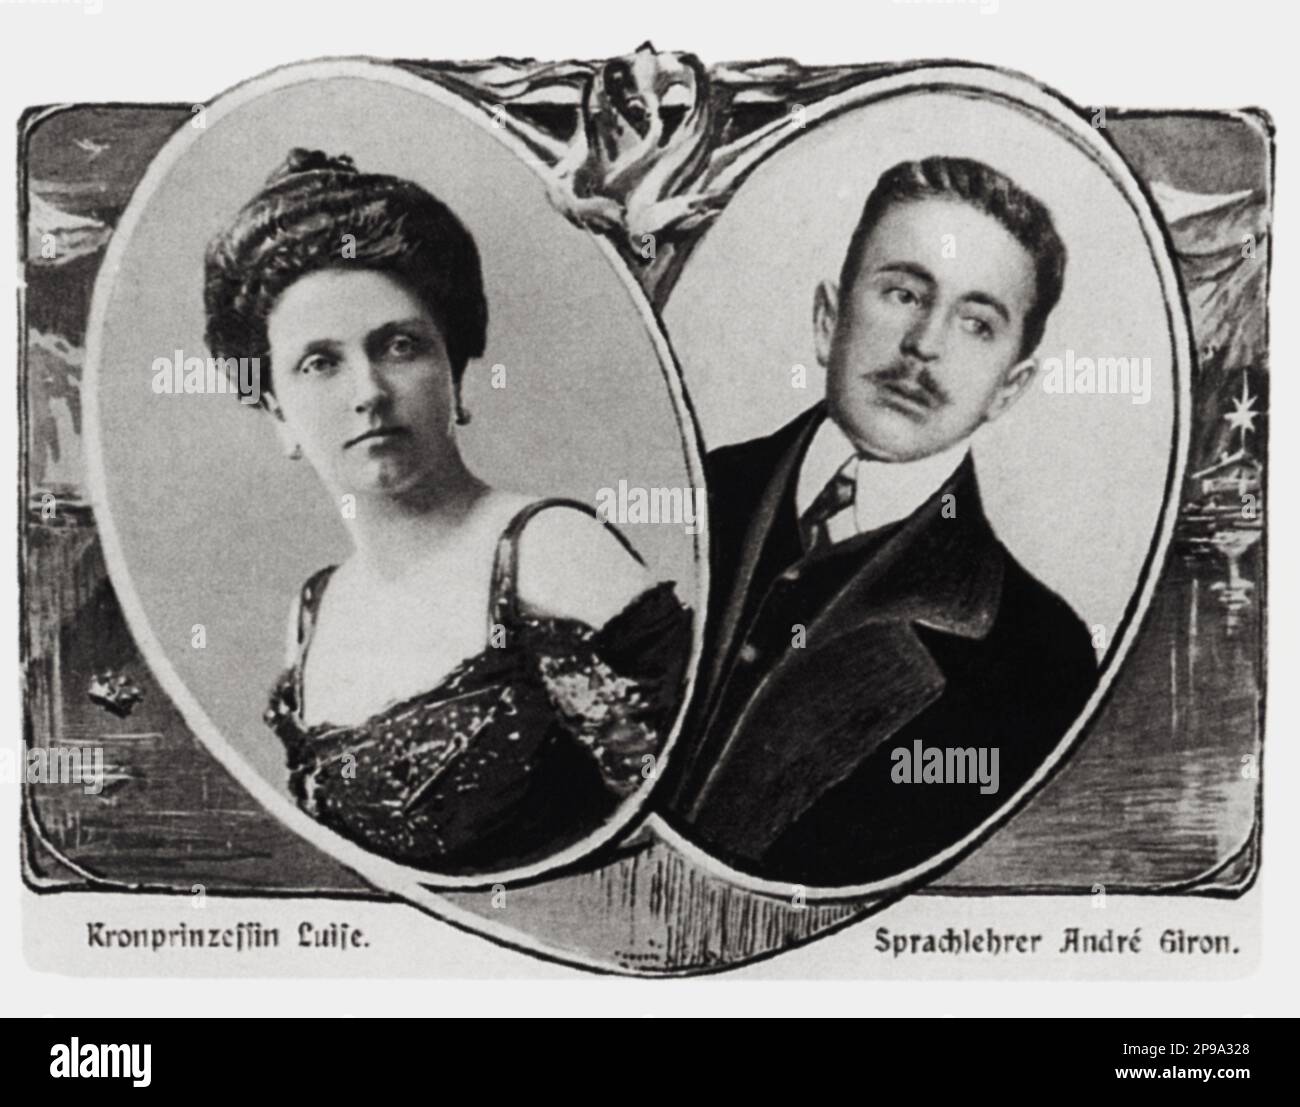 1900  : The scandalous Kronprinzessin zu Sachsen  LUISA VON TOSCANA ( Luise , Louise von Österreich - Toskana  , Salzburg 1870 – Bruxelles 1947 ). Married with Friedrich August III von Sachsen ( Frederick Augustus ,1865 - 1932), with him have 7 sons. Princess Imperial and Archduchess of Austria, Princess of Tuscany, Hungary and Bohemia was a daughter of Ferdinand IV of Tuscany and his second wife Alicia of Parma, daughter of Duke Charles III and Louise of Berry. She didn't follow etiquette at the court, which resulted in arguments with her father-in-law. On 9 December 1902 she left Saxony with Stock Photo